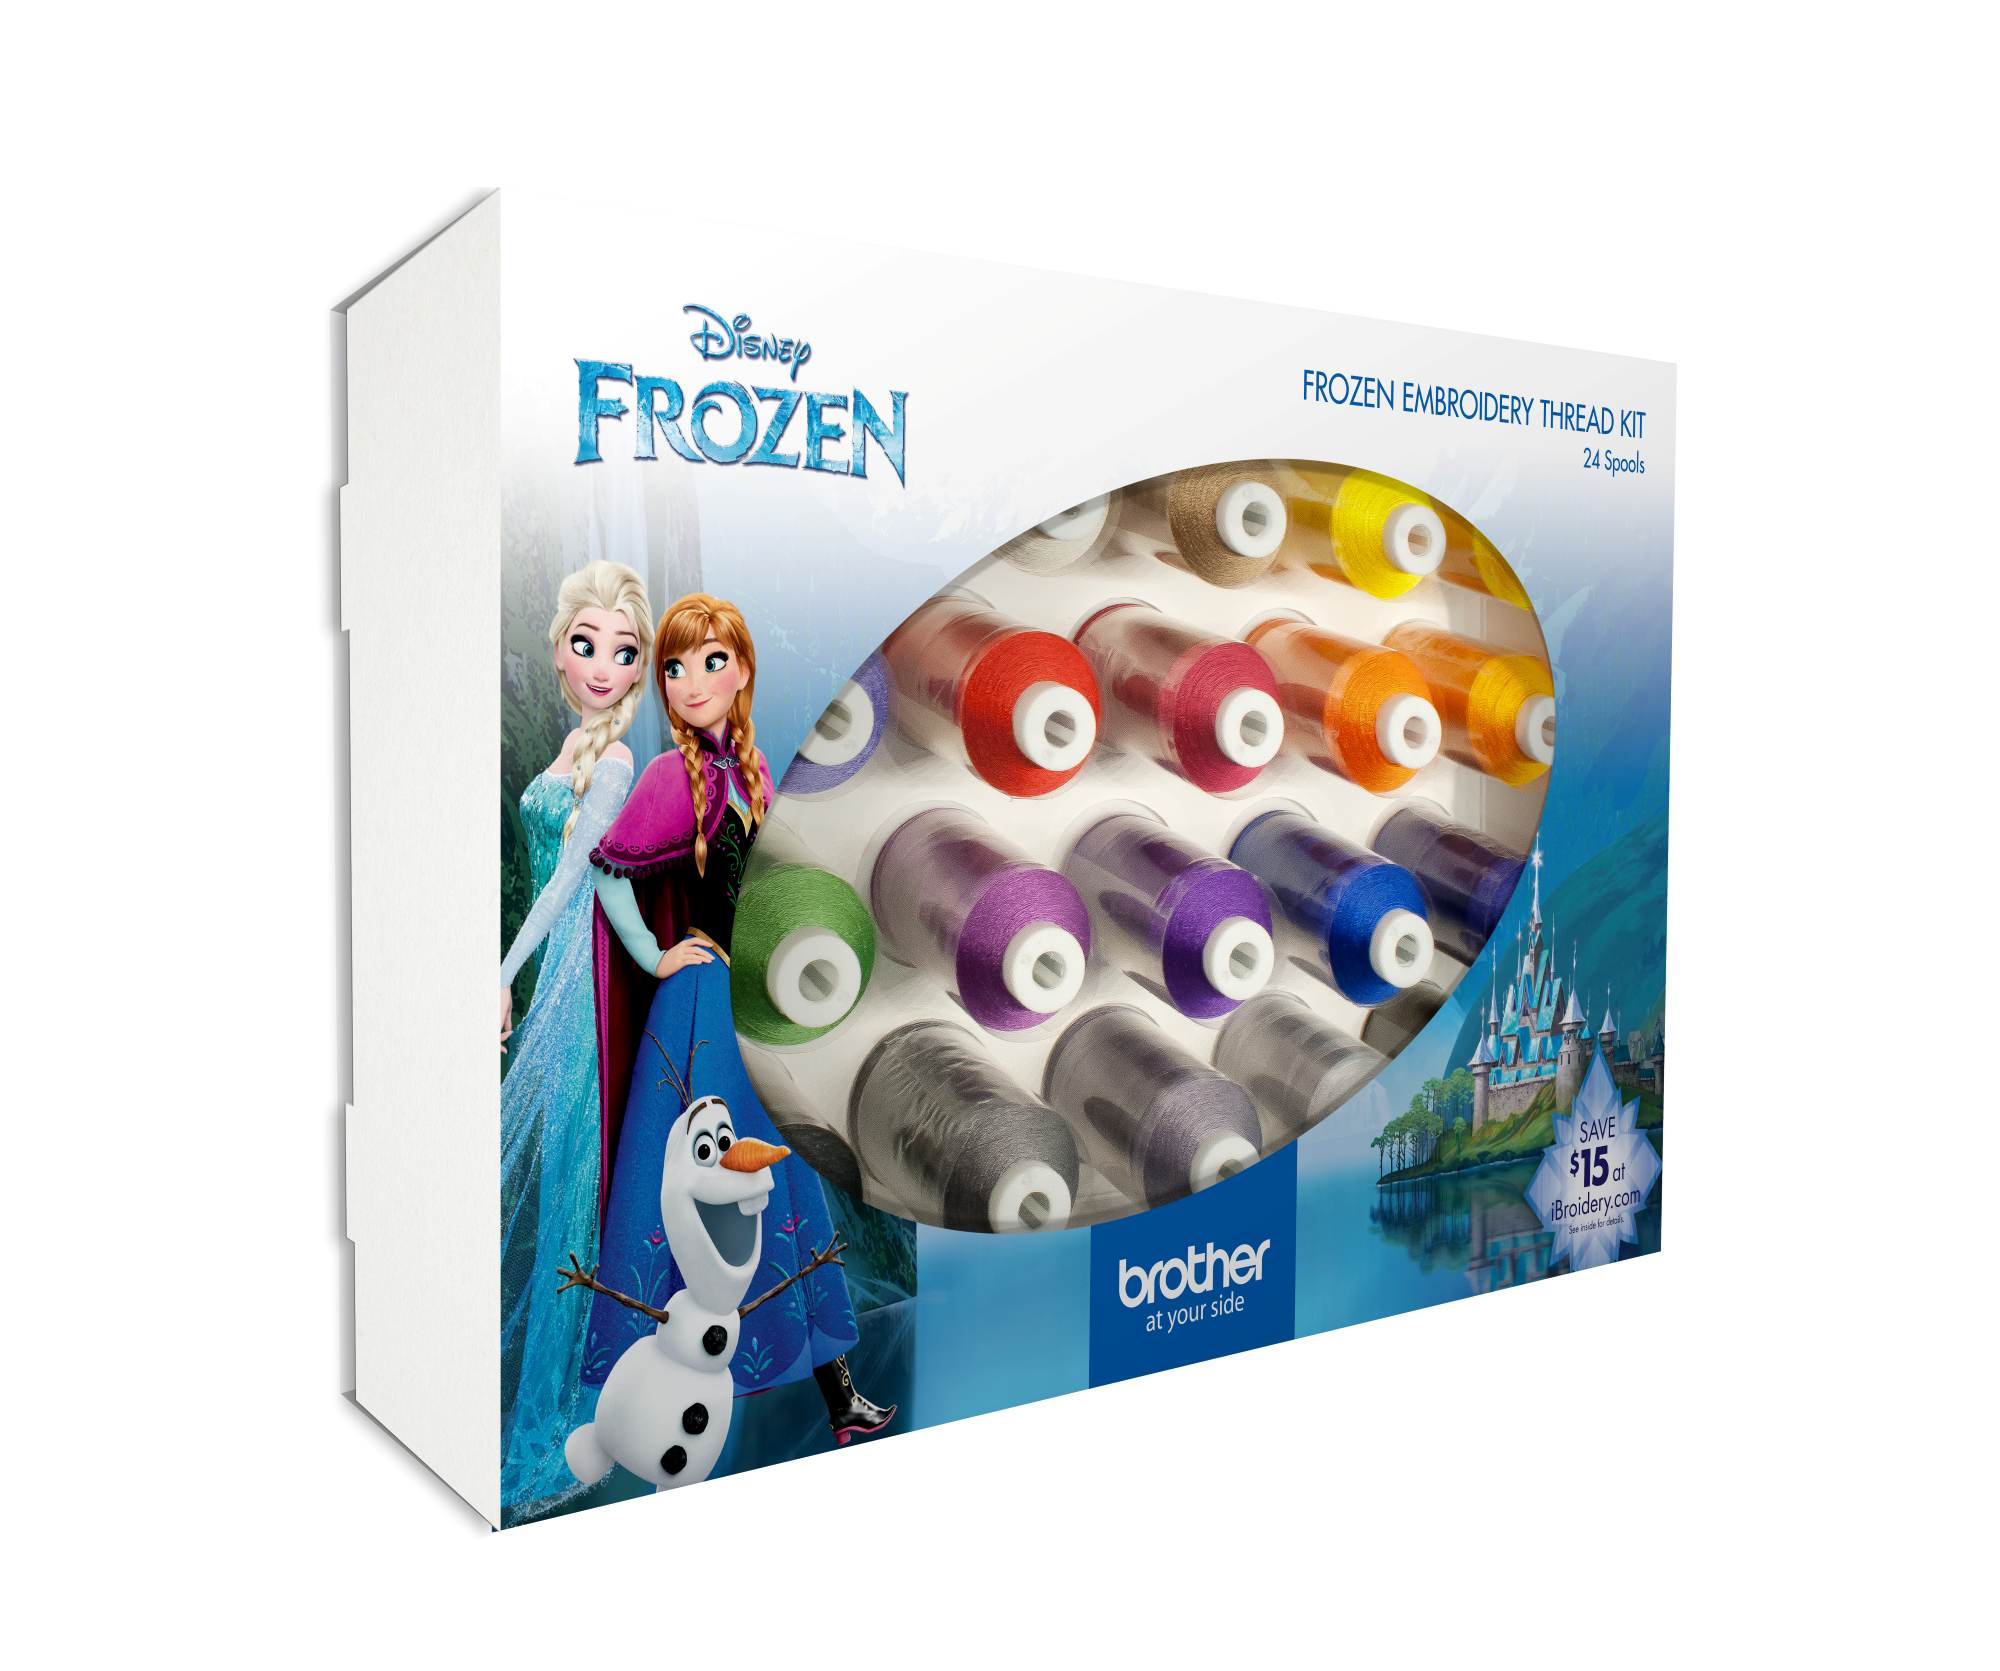 Brother Disney Frozen 24 Spool Embroidery Thread Kit ETPFROZ124 for Sale at World Weidner